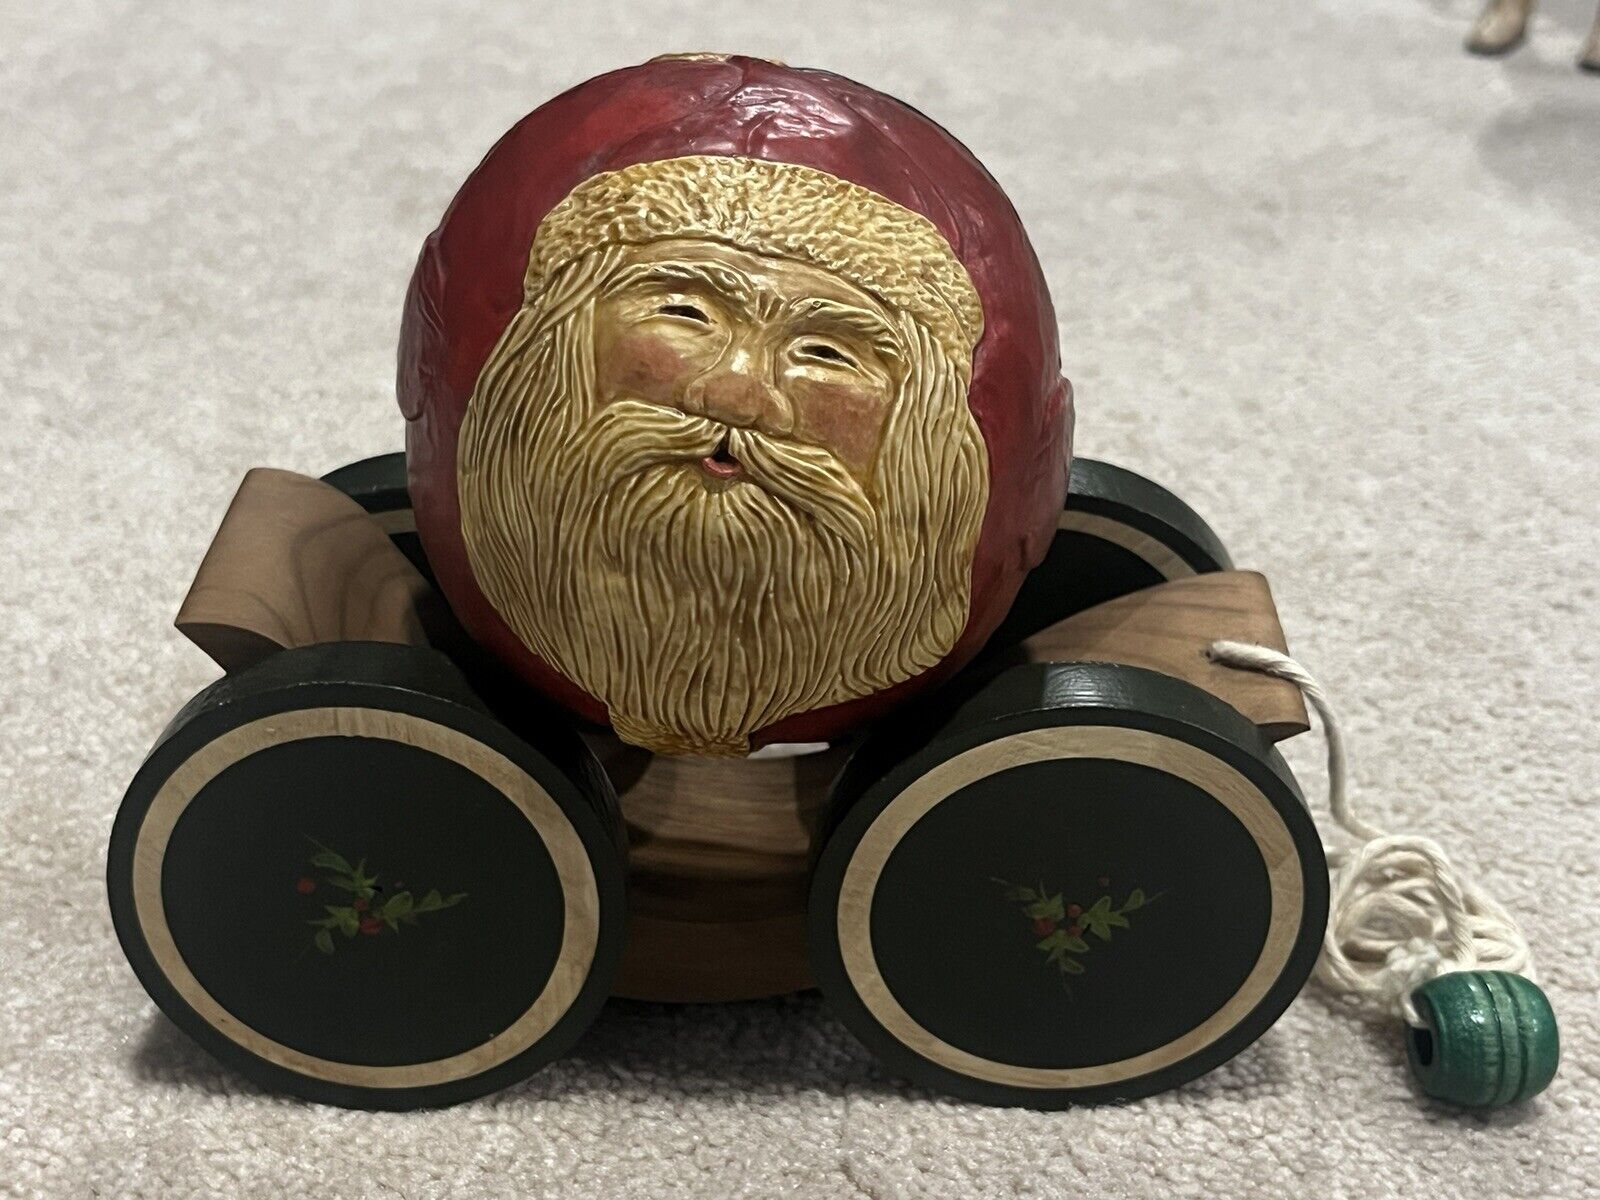 VINTAGE 1986 BRIERE SANTA ROLY POLY PULL TOY BALL CART SIGNED BY ARTIST